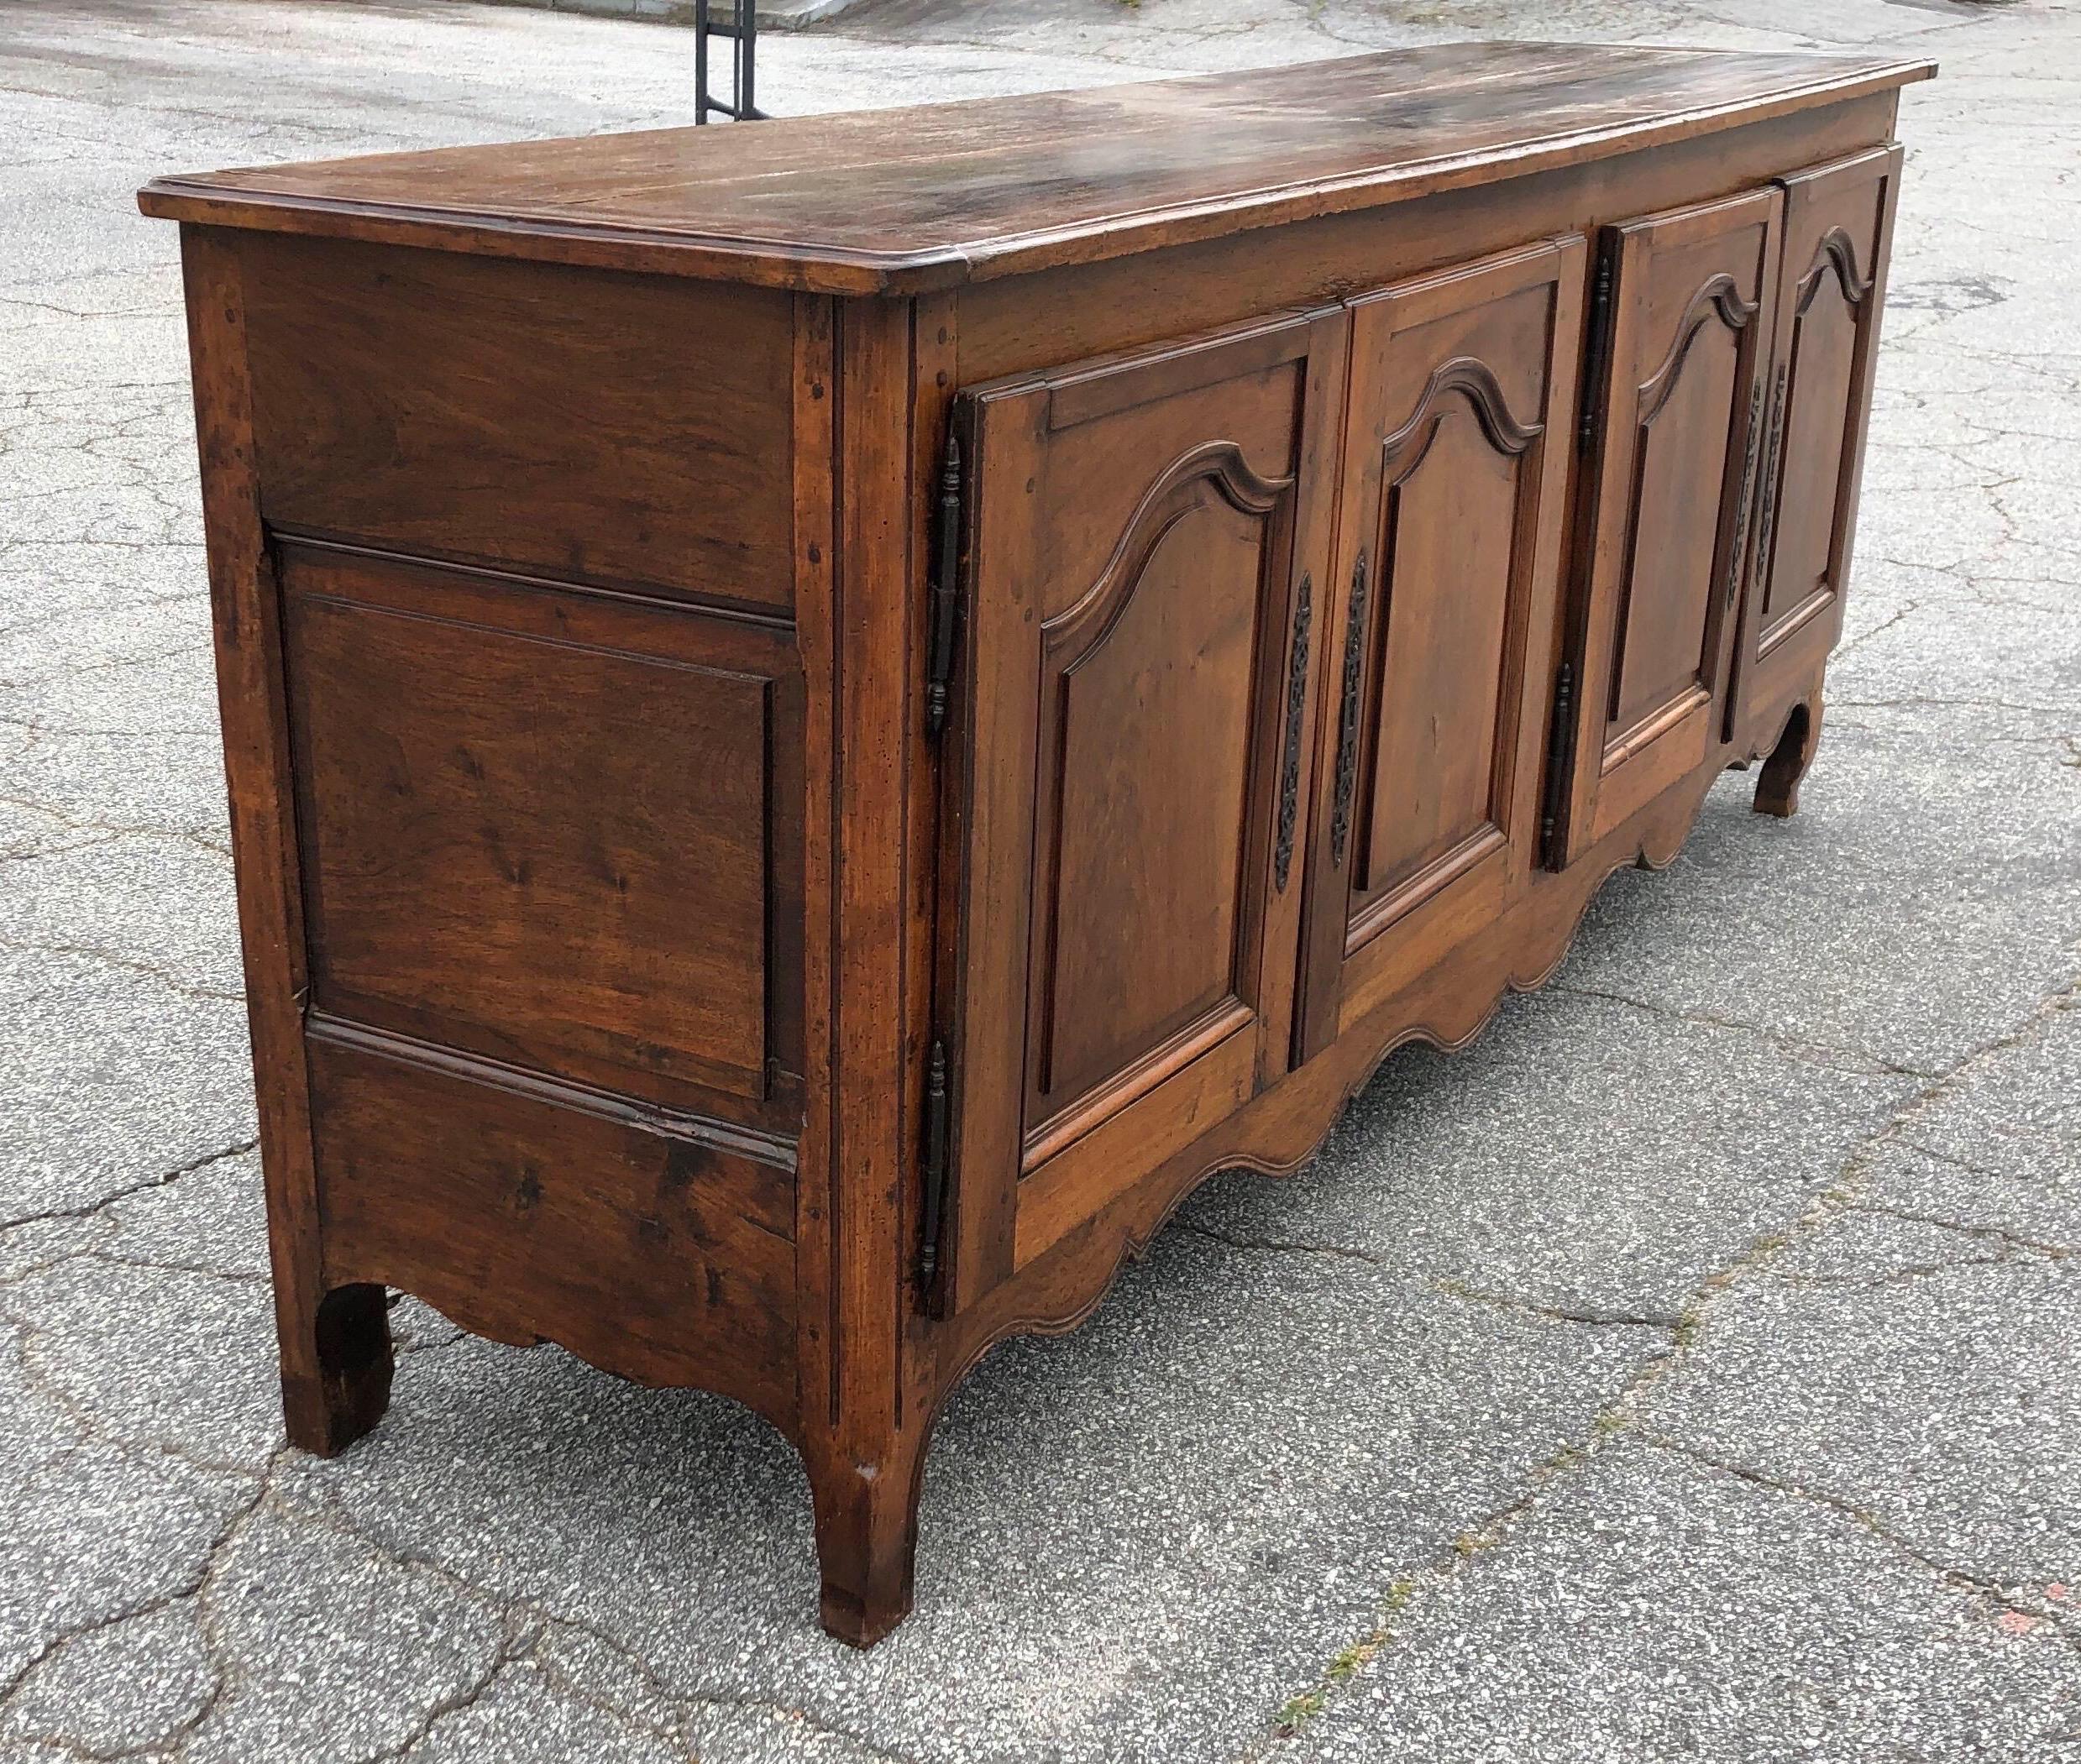 18th-19th Century Walnut and Cherry French Provincial 4-Door Enfilade 1